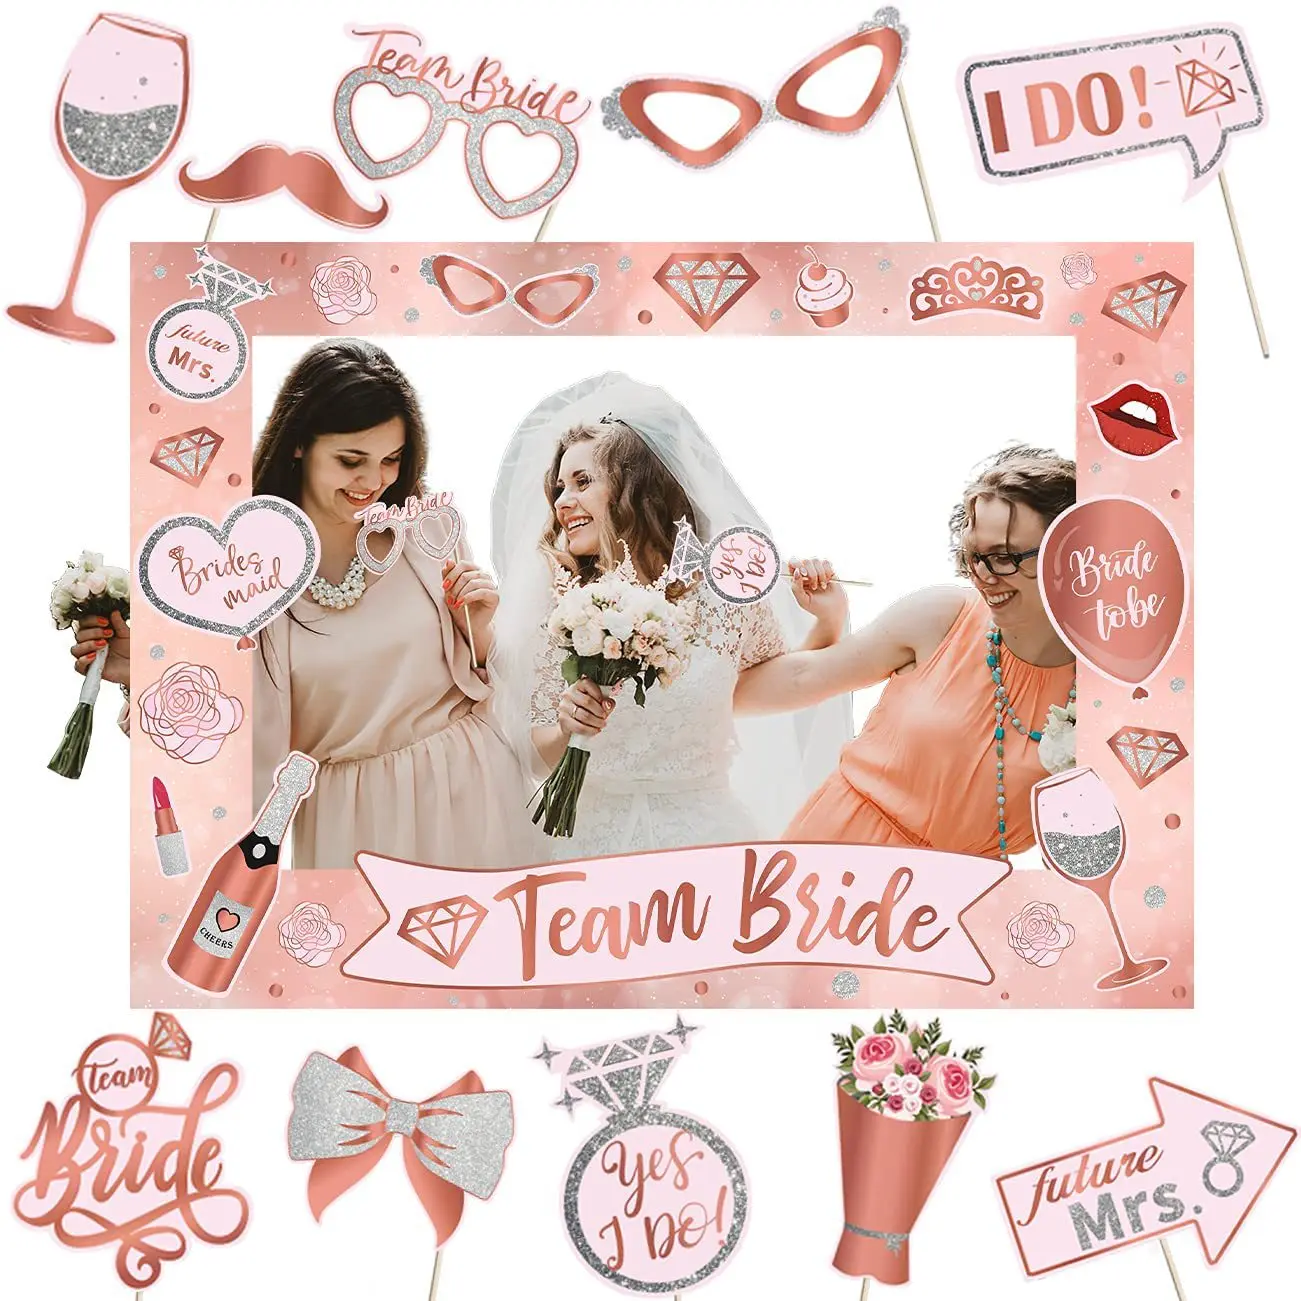 Bride To Be Bride Team Shooting Photo Frame Props Wedding Lady Hen Party Bridal Shower Yes I Do Bachelor Party Supplies